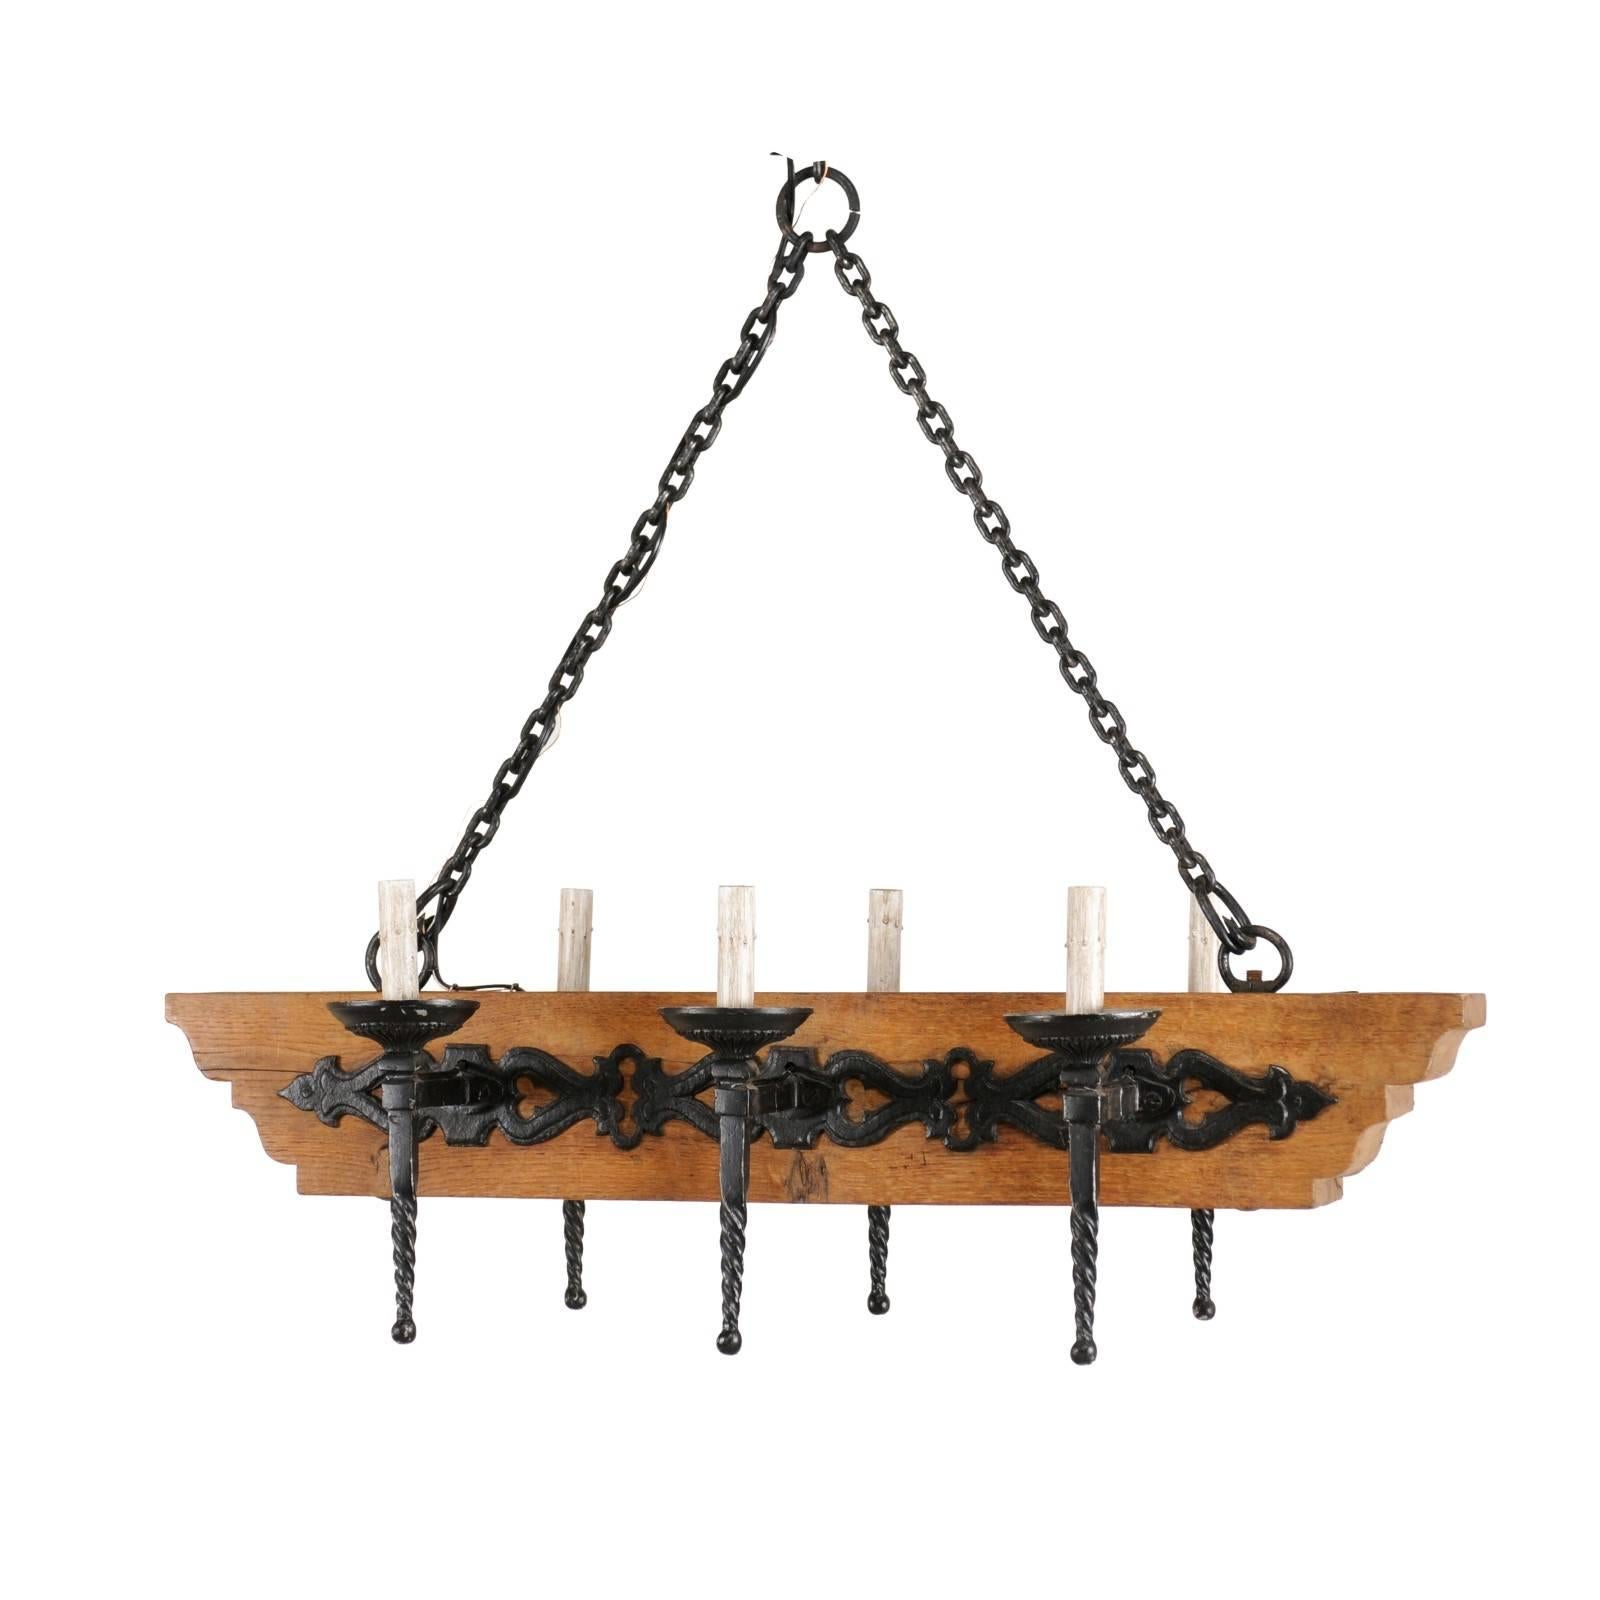 French Vintage Six-Light Wood and Ornate Iron Chandelier with Torch Style Arms